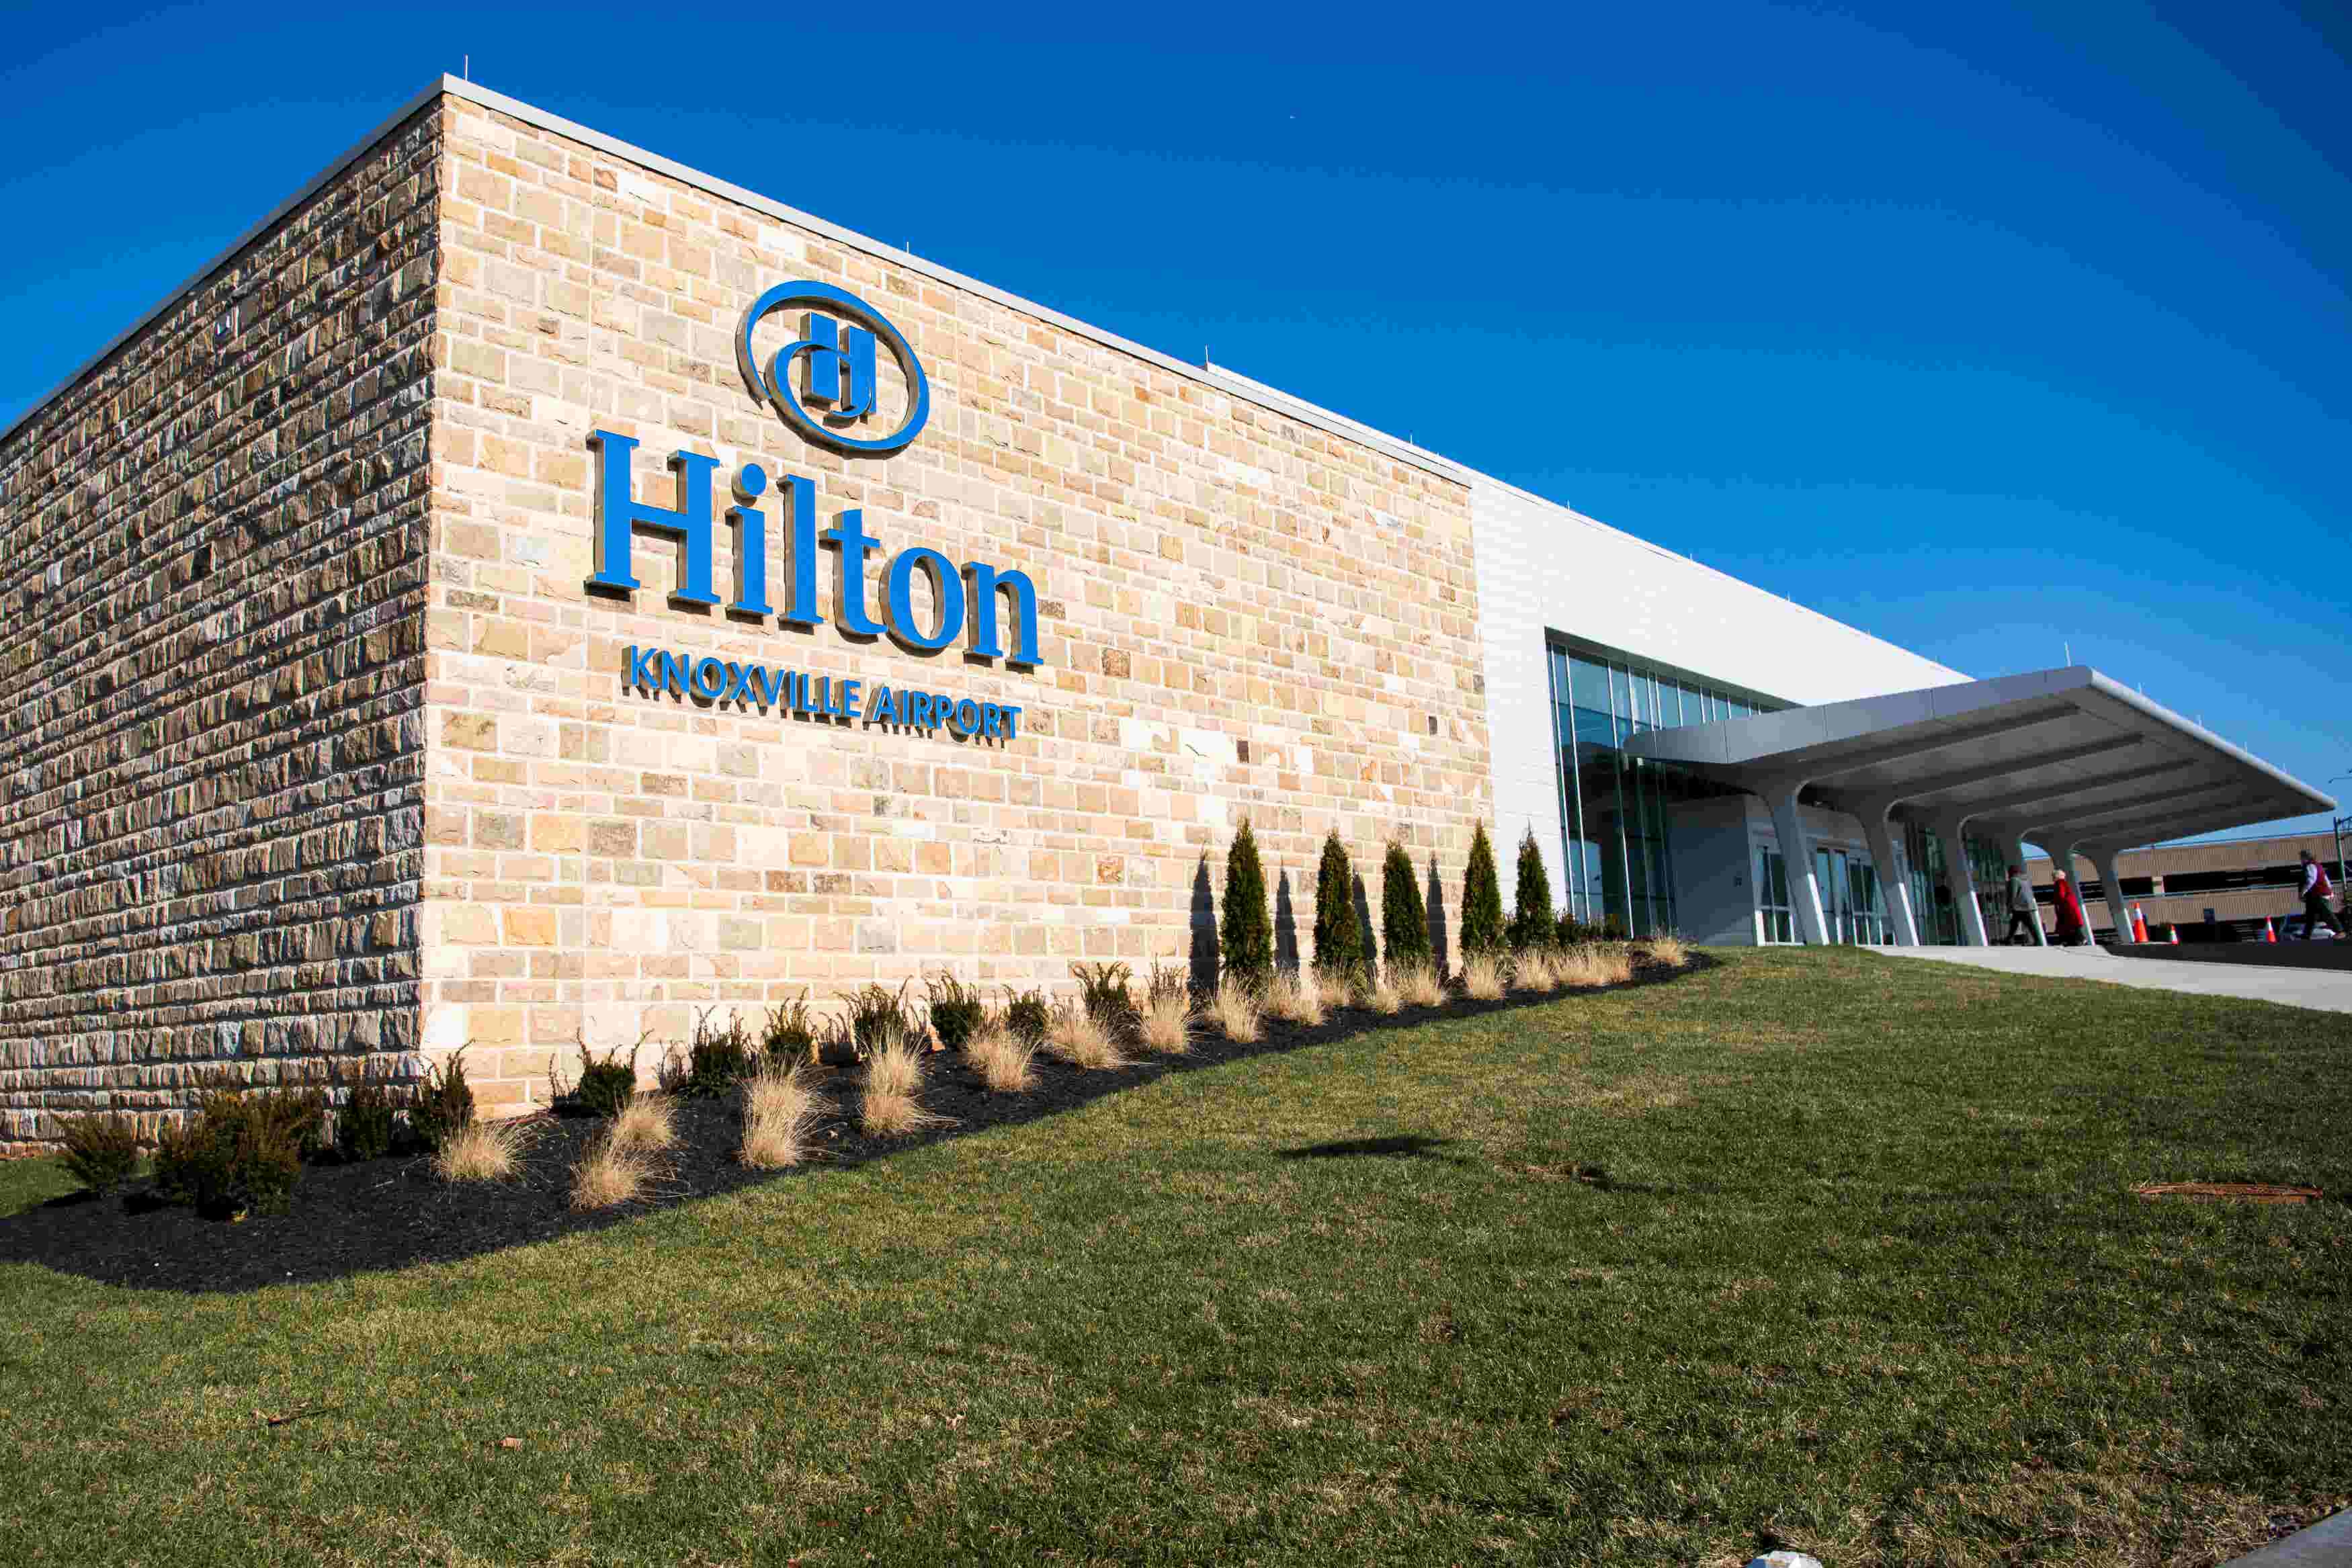 Take a look inside Hilton Knoxville Airport's new conference center